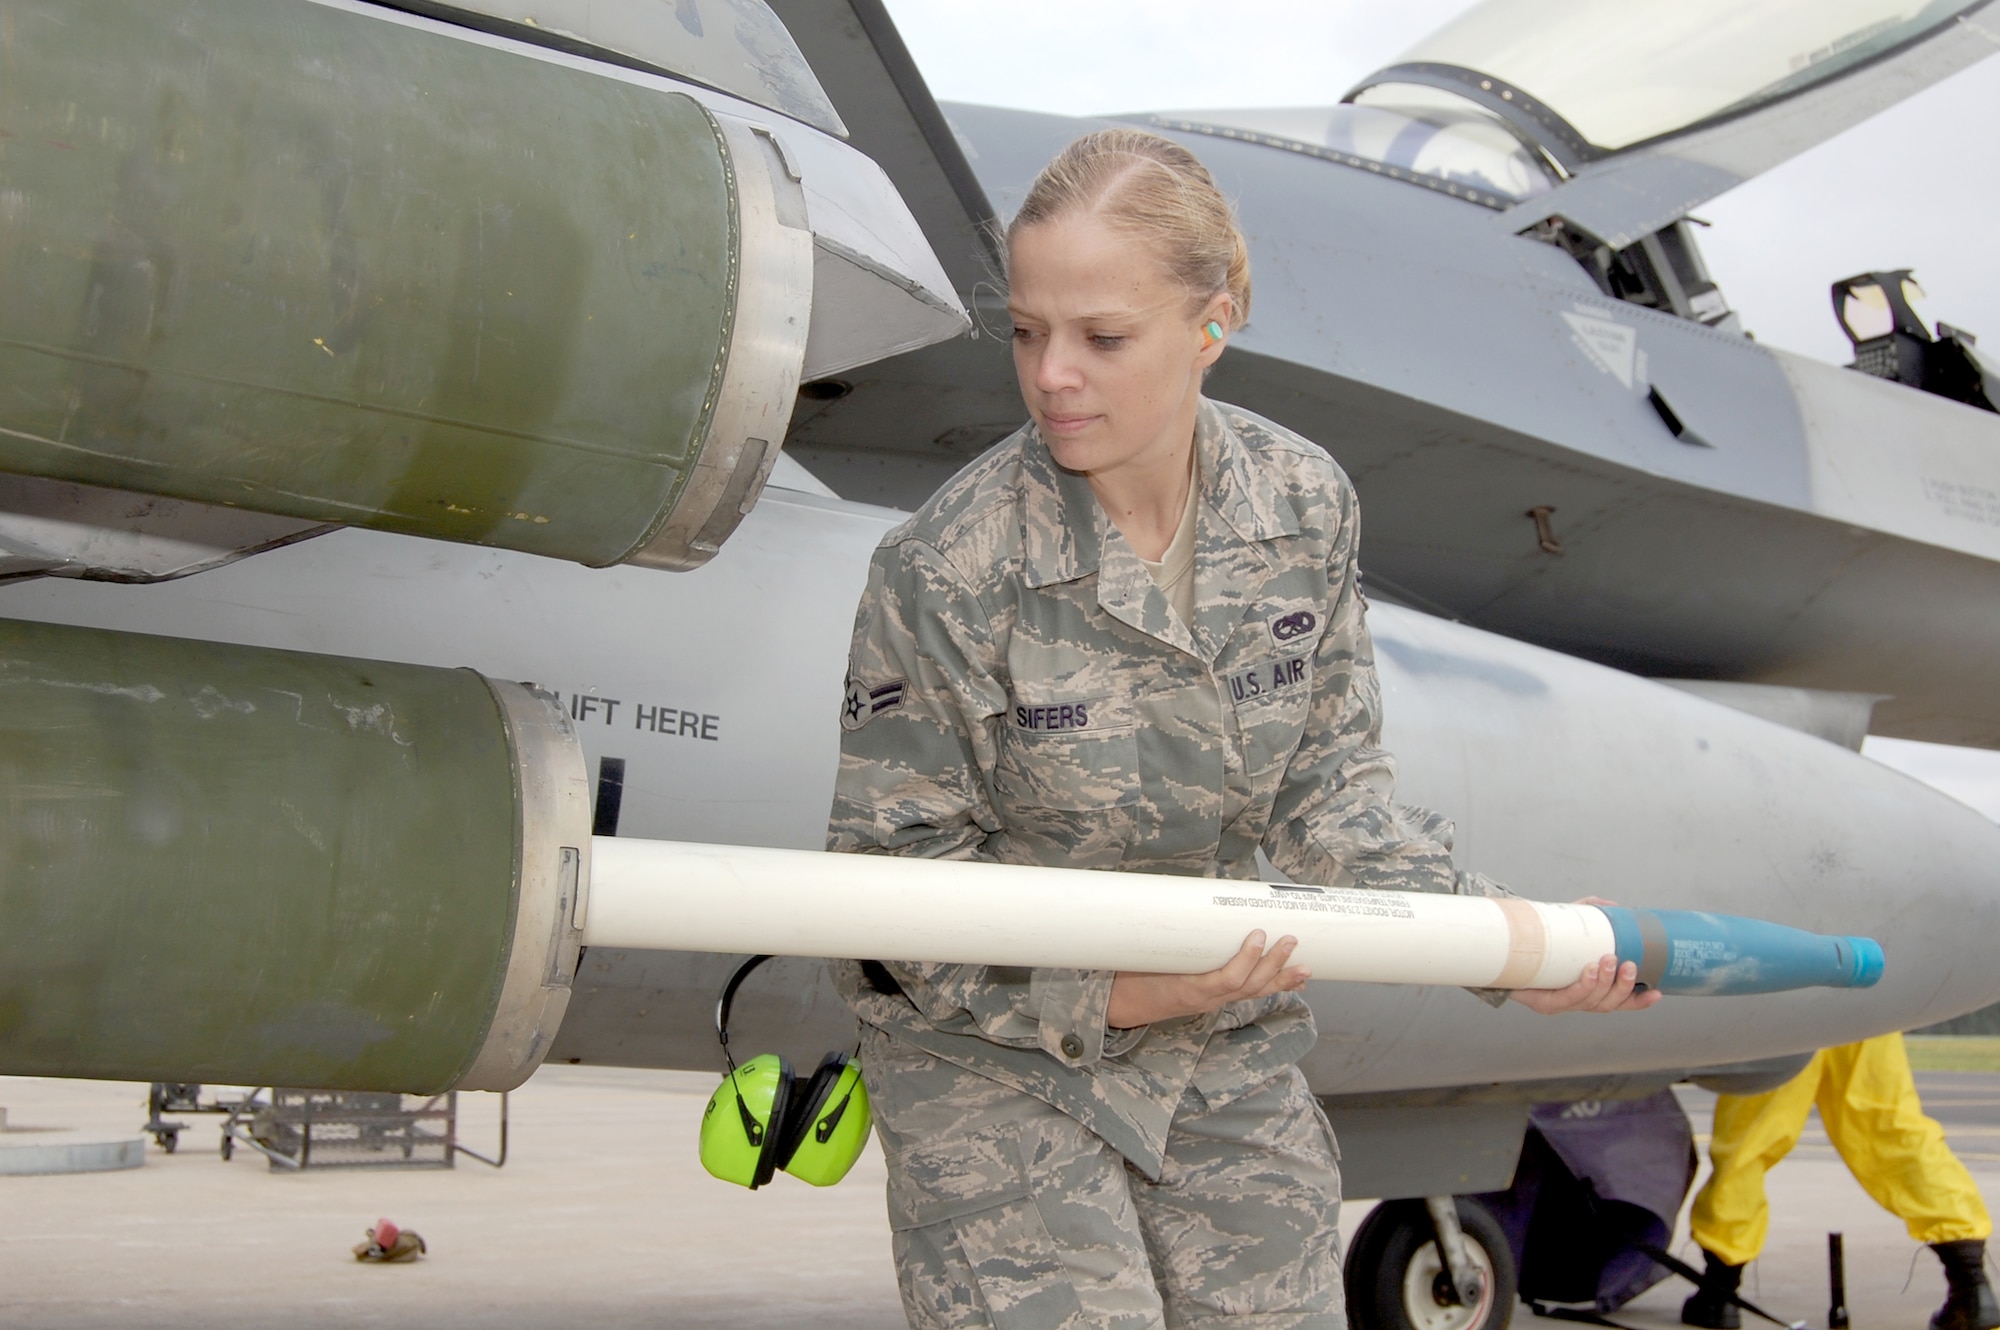 Airman 1st Class Kelly Sifers loads a practice rocket onto an F-16 Fighting Falcon during a training exercise Aug. 4, 2010, at Kallax Air Base, Sweden. The 555th Fighter Squadron and 31st Aircraft Maintenance Squadron conducted more than 180 air-to-air and air-to-ground missions during a two-week exercise here working alongside members of the Swedish air force's Norrbotten Wing. Airman Sifers is a 31st Aircraft Maintenance Squadron weapons load crew member. (U.S. Air Force photo/Tech. Sgt. Lindsey Maurice)
